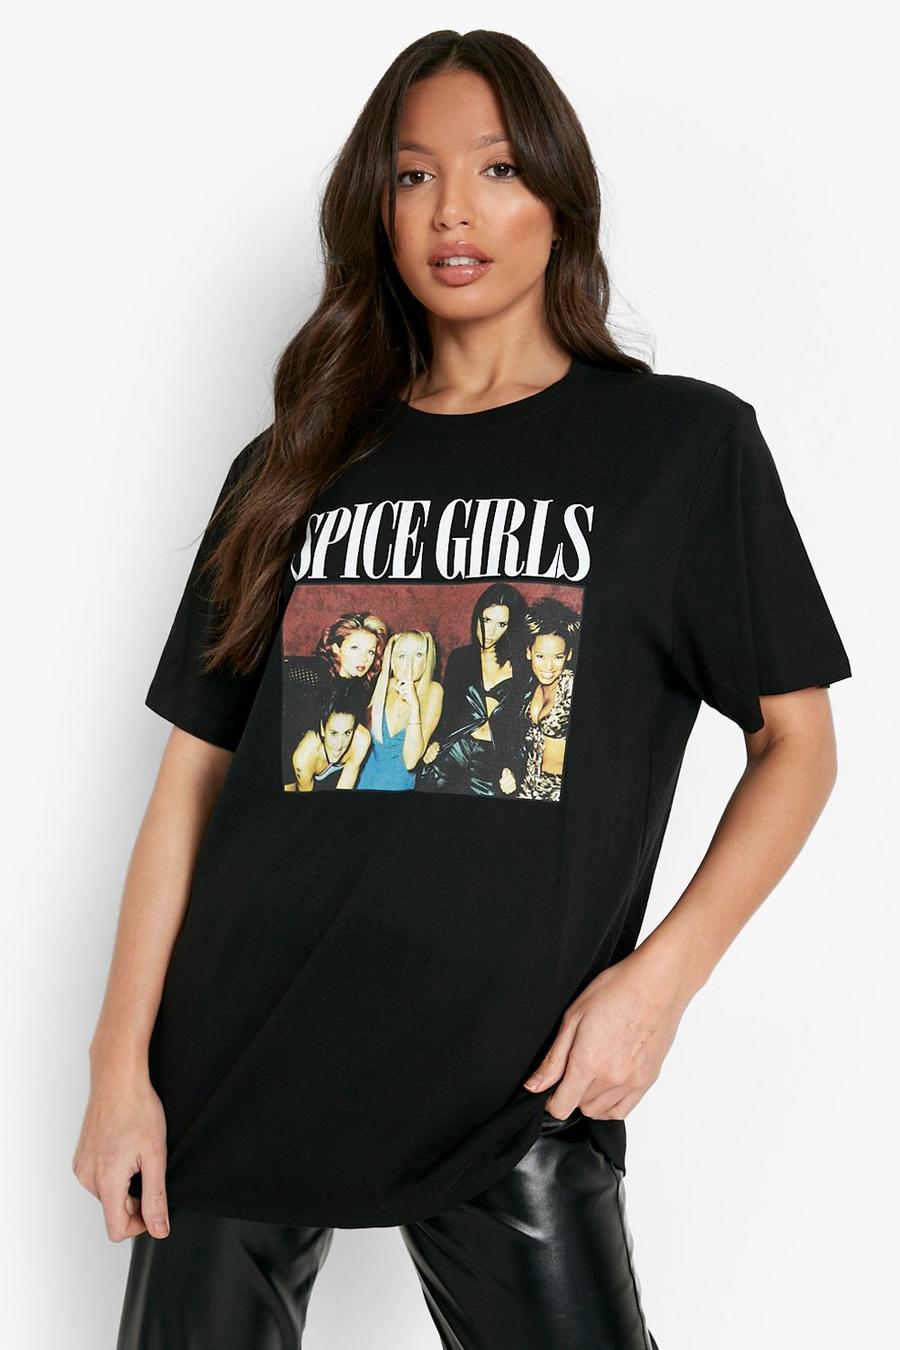 Material Girl T-Shirts- Black- Small-XLarge – The A-List Label